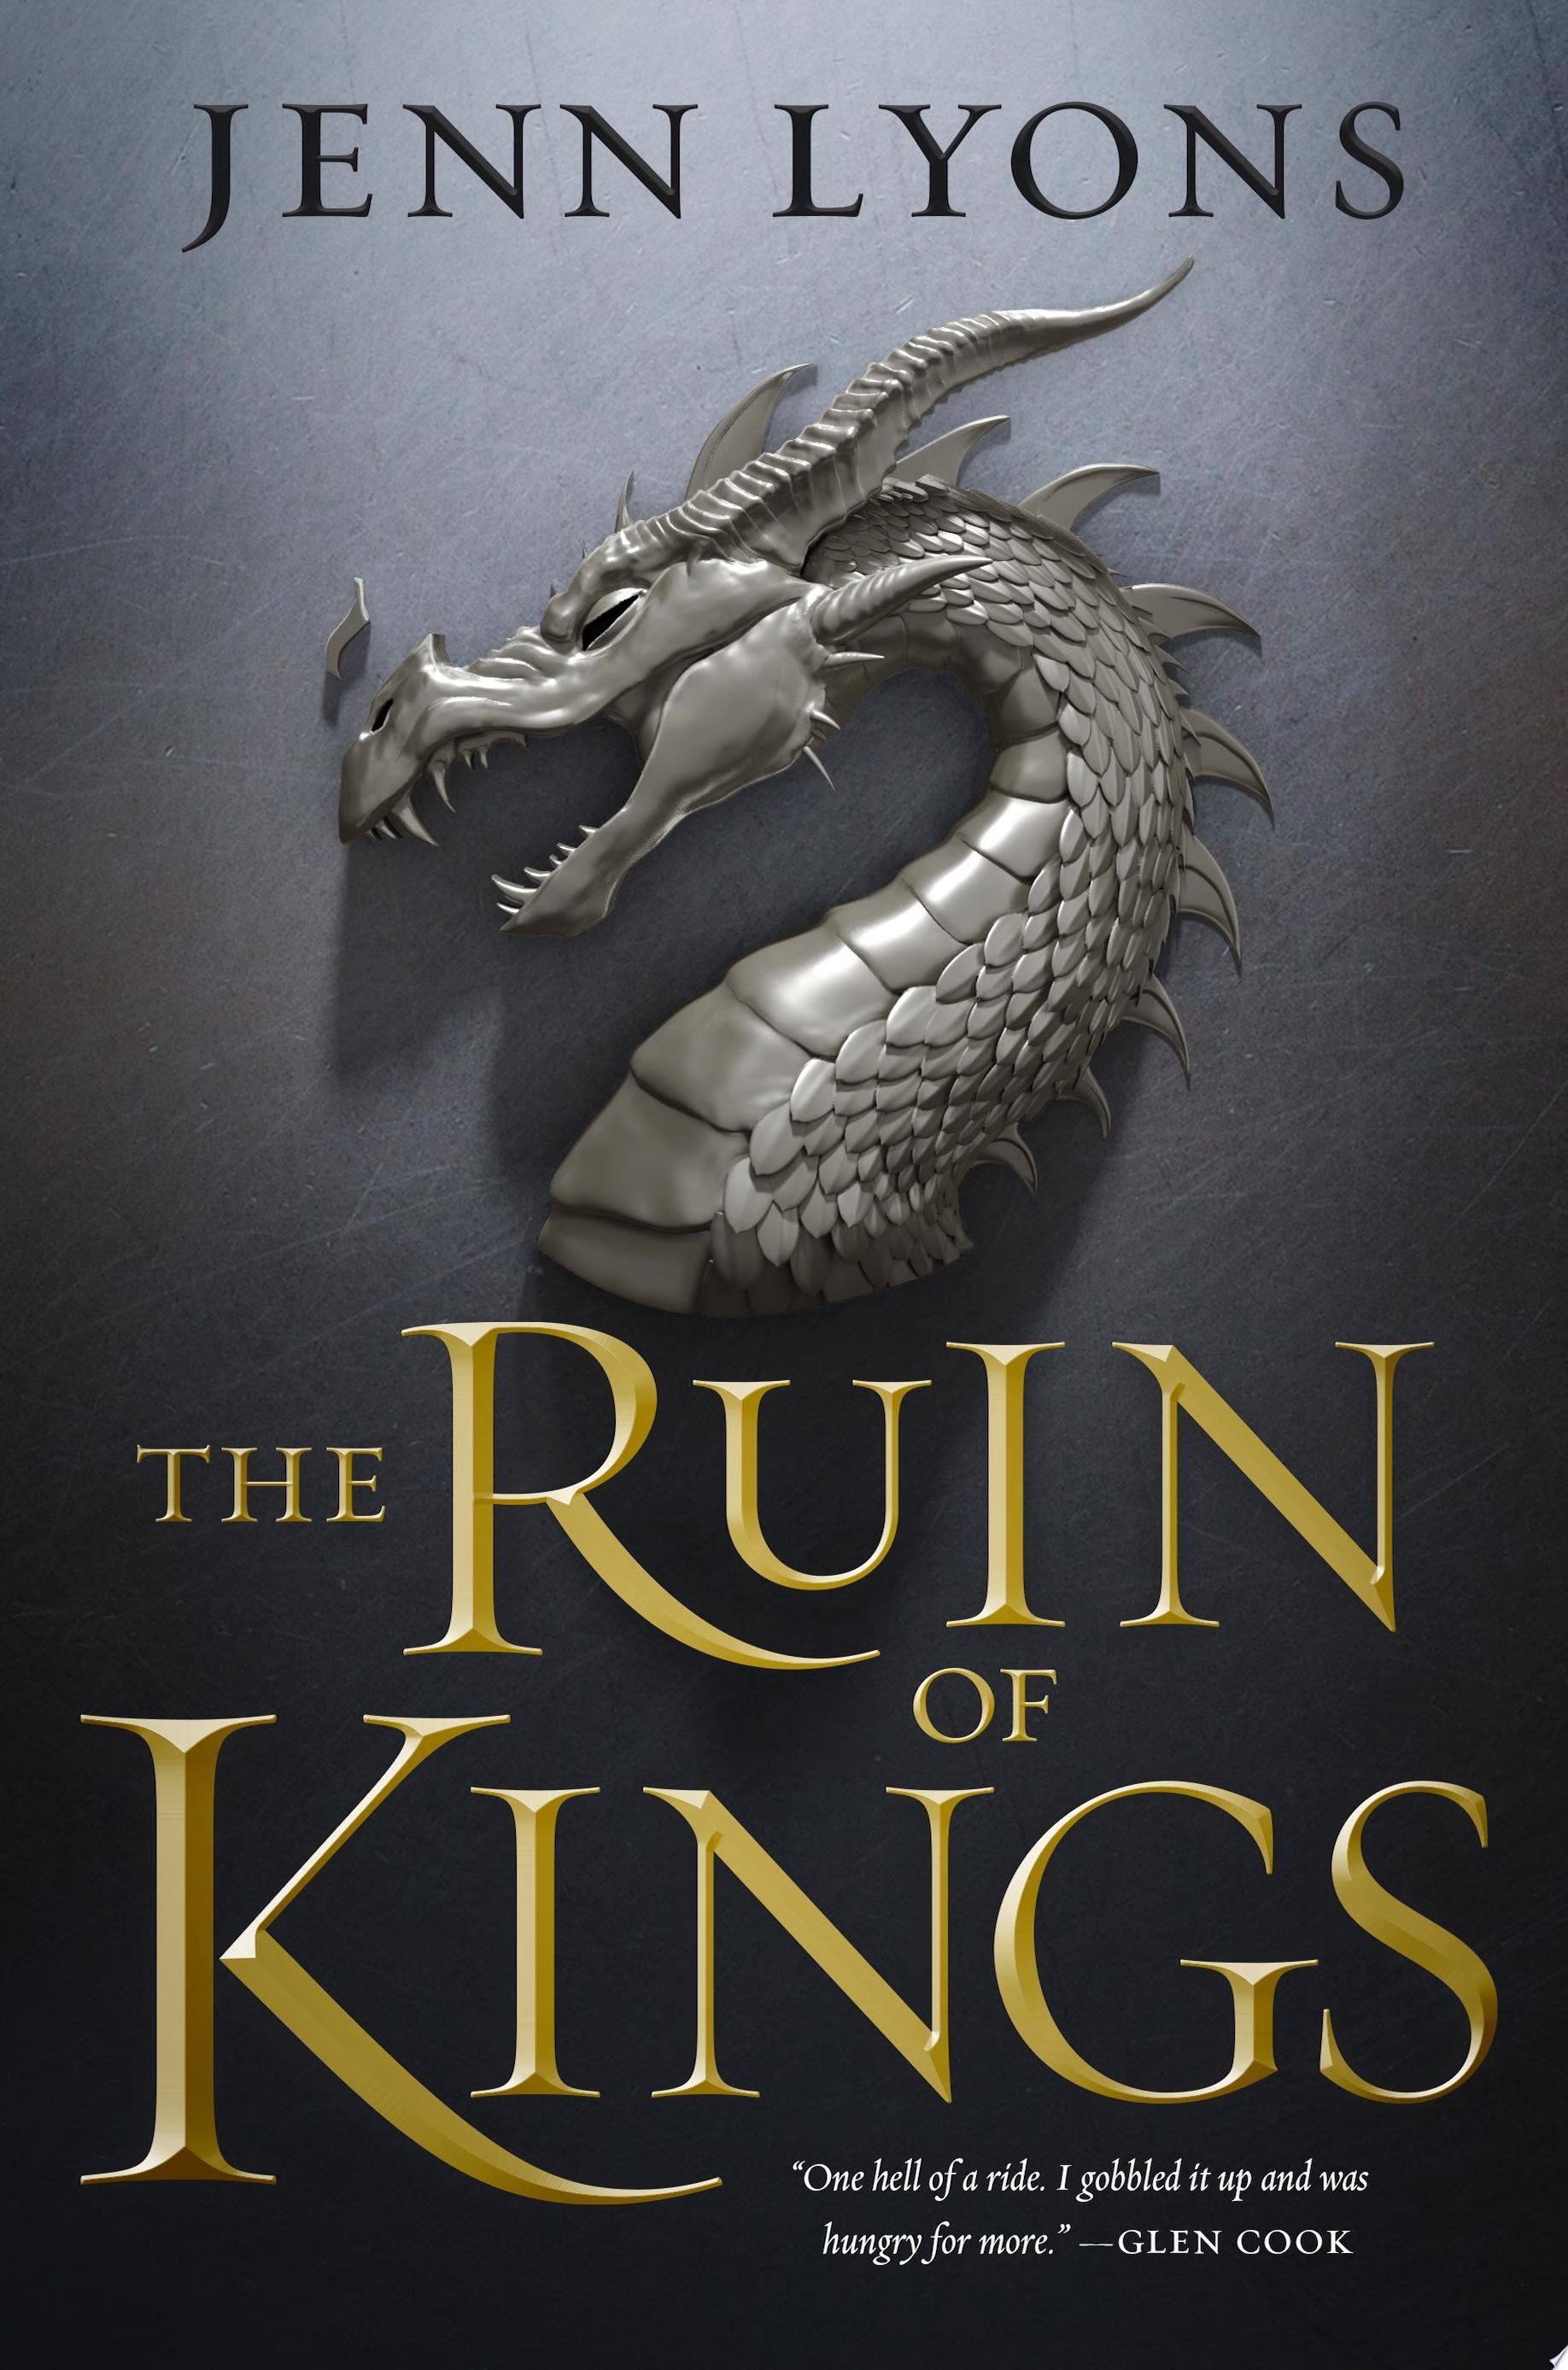 Image for "The Ruin of Kings"